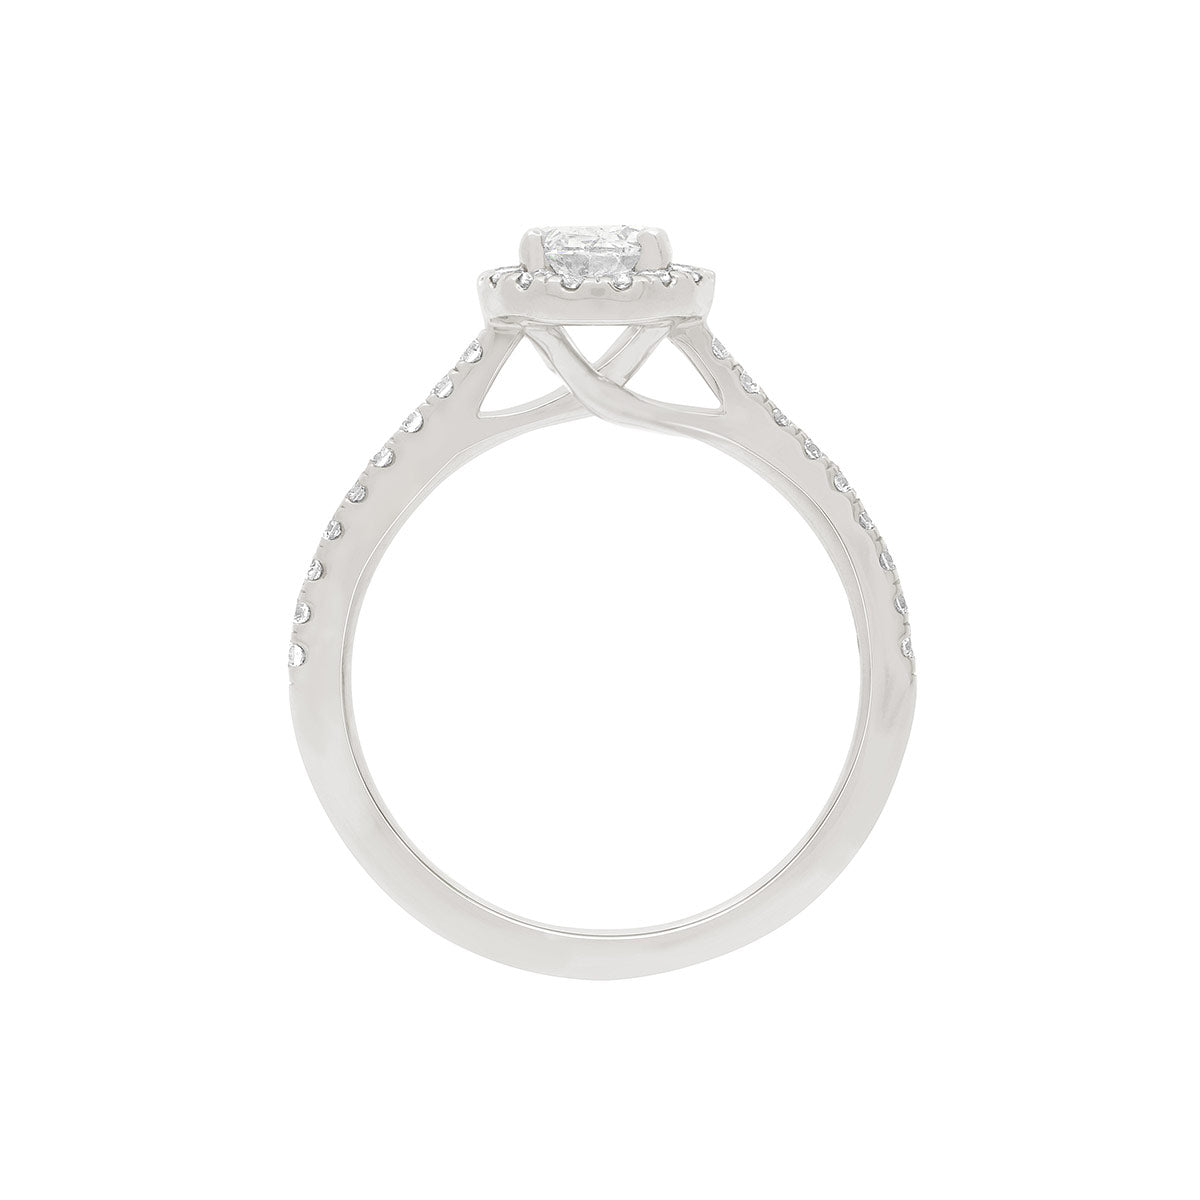 Round Halo Diamond Ring in white gold standing upright with a white background